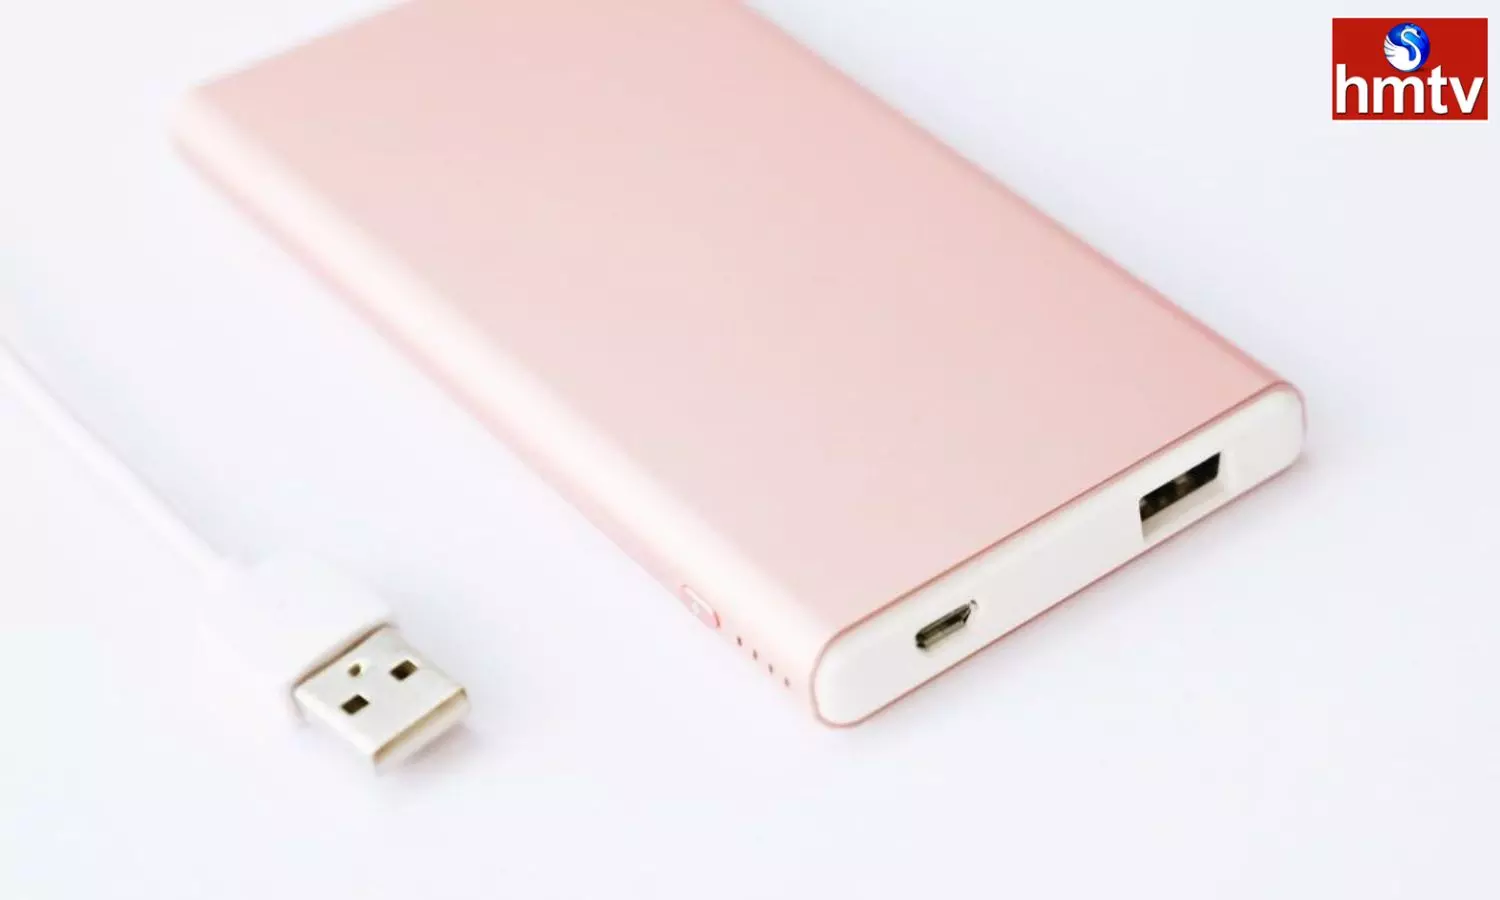 Are you Troubled by Frequent Charging Problems Buy these Power Banks at Low Price